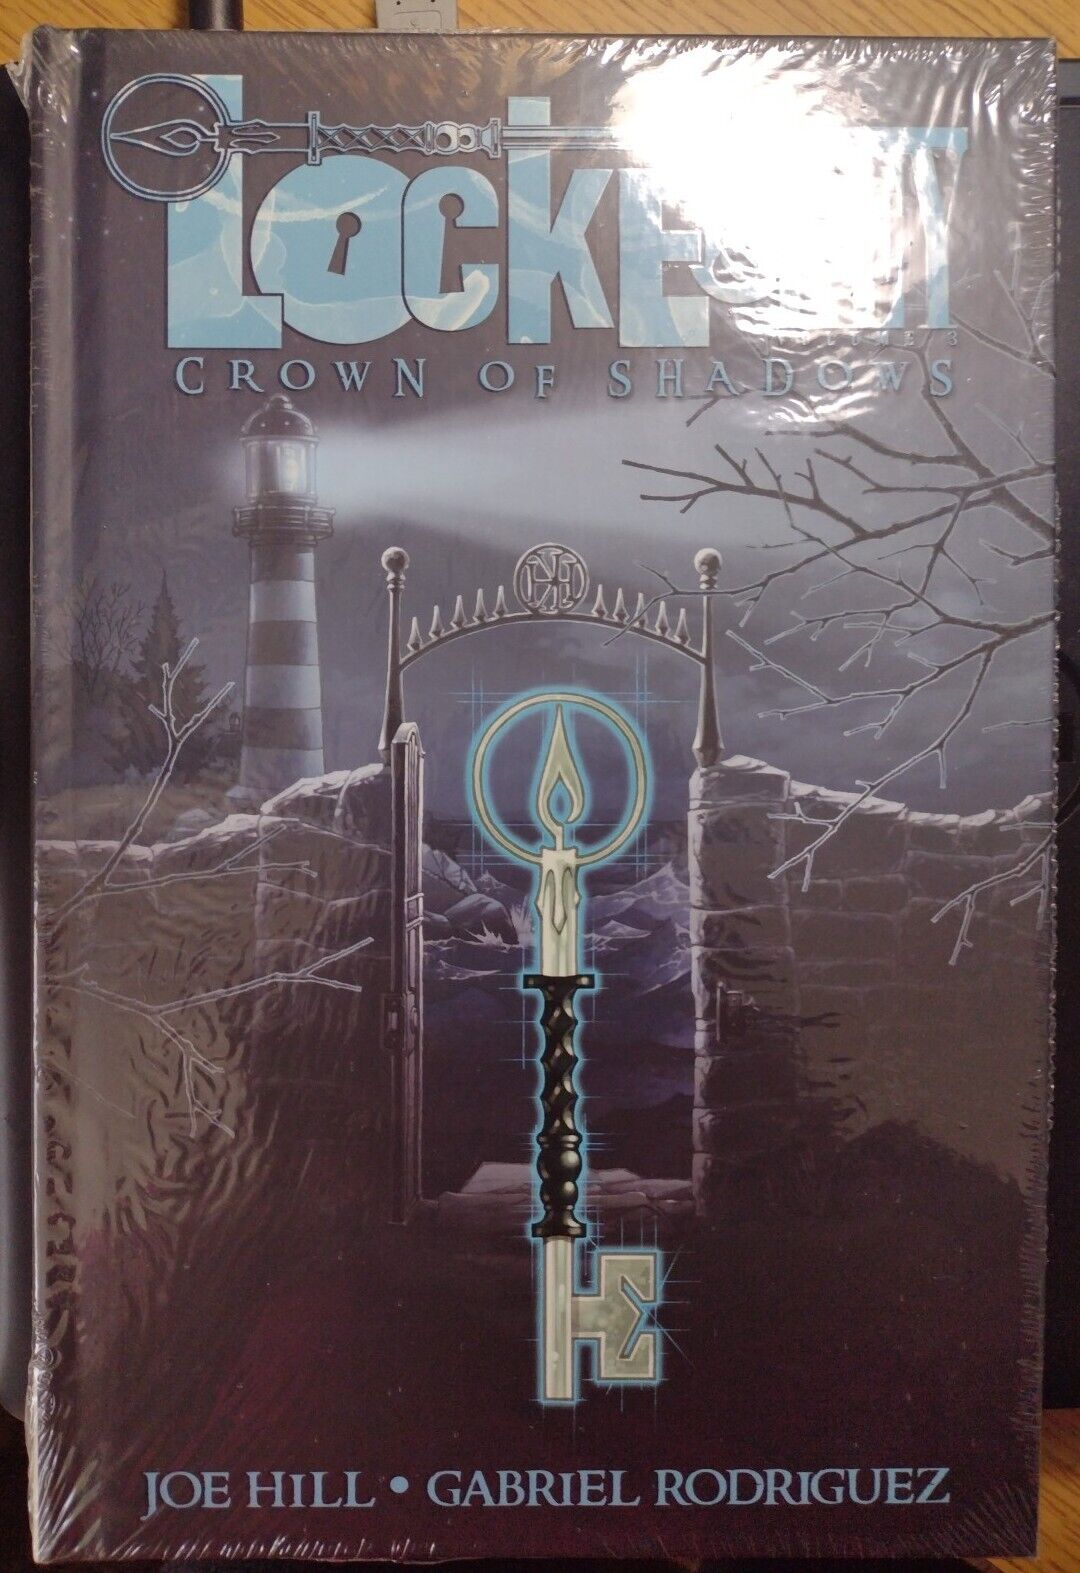 IDW Locke & Key #3 CROWN OF SHADOWS. NEW NEVER OPENED. 